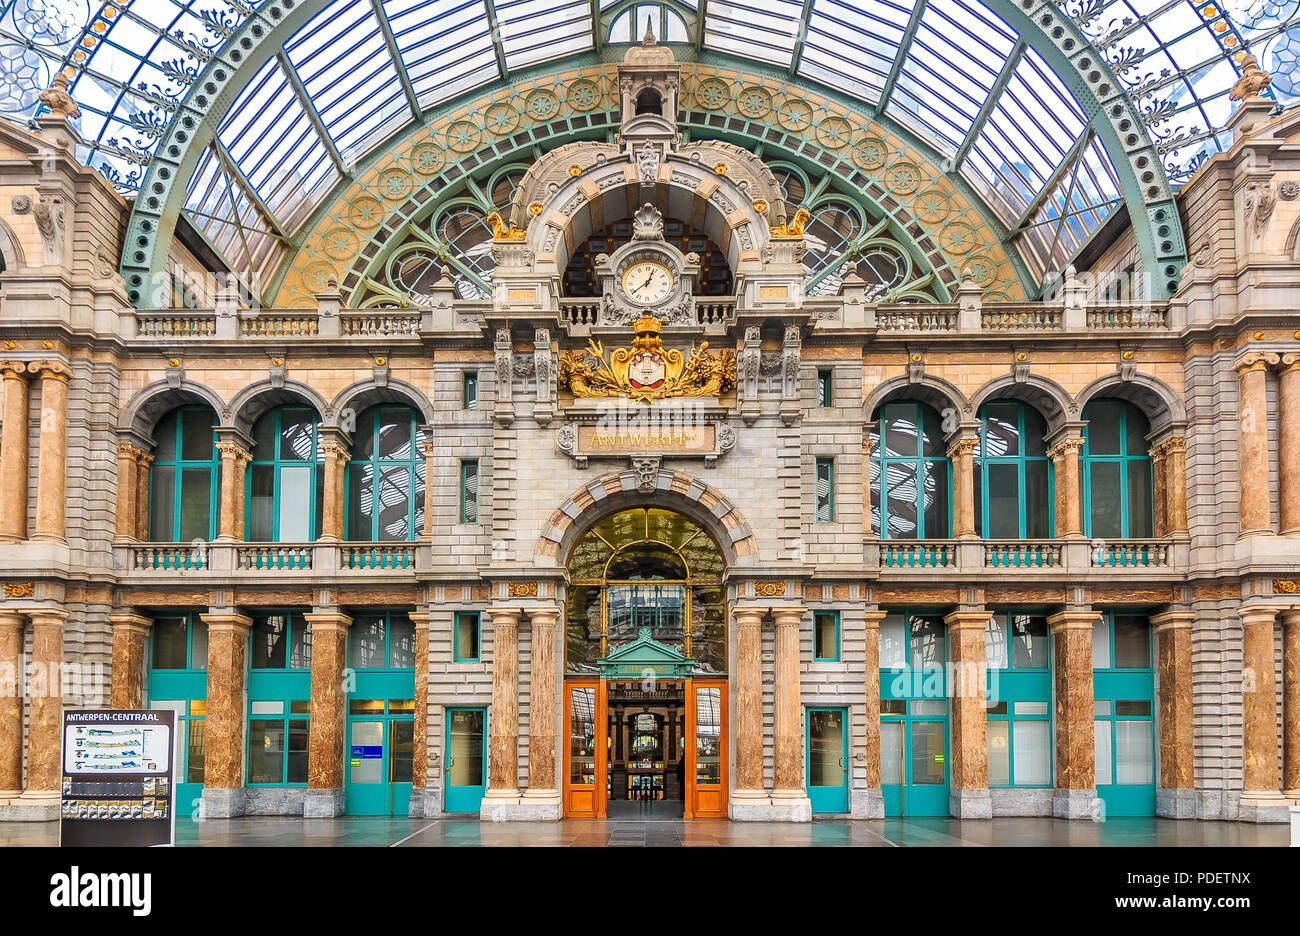 Antwerp, Belgium - January 18, 2015: Hall of the famous restored Antwerp Central Train Station Stock Photo